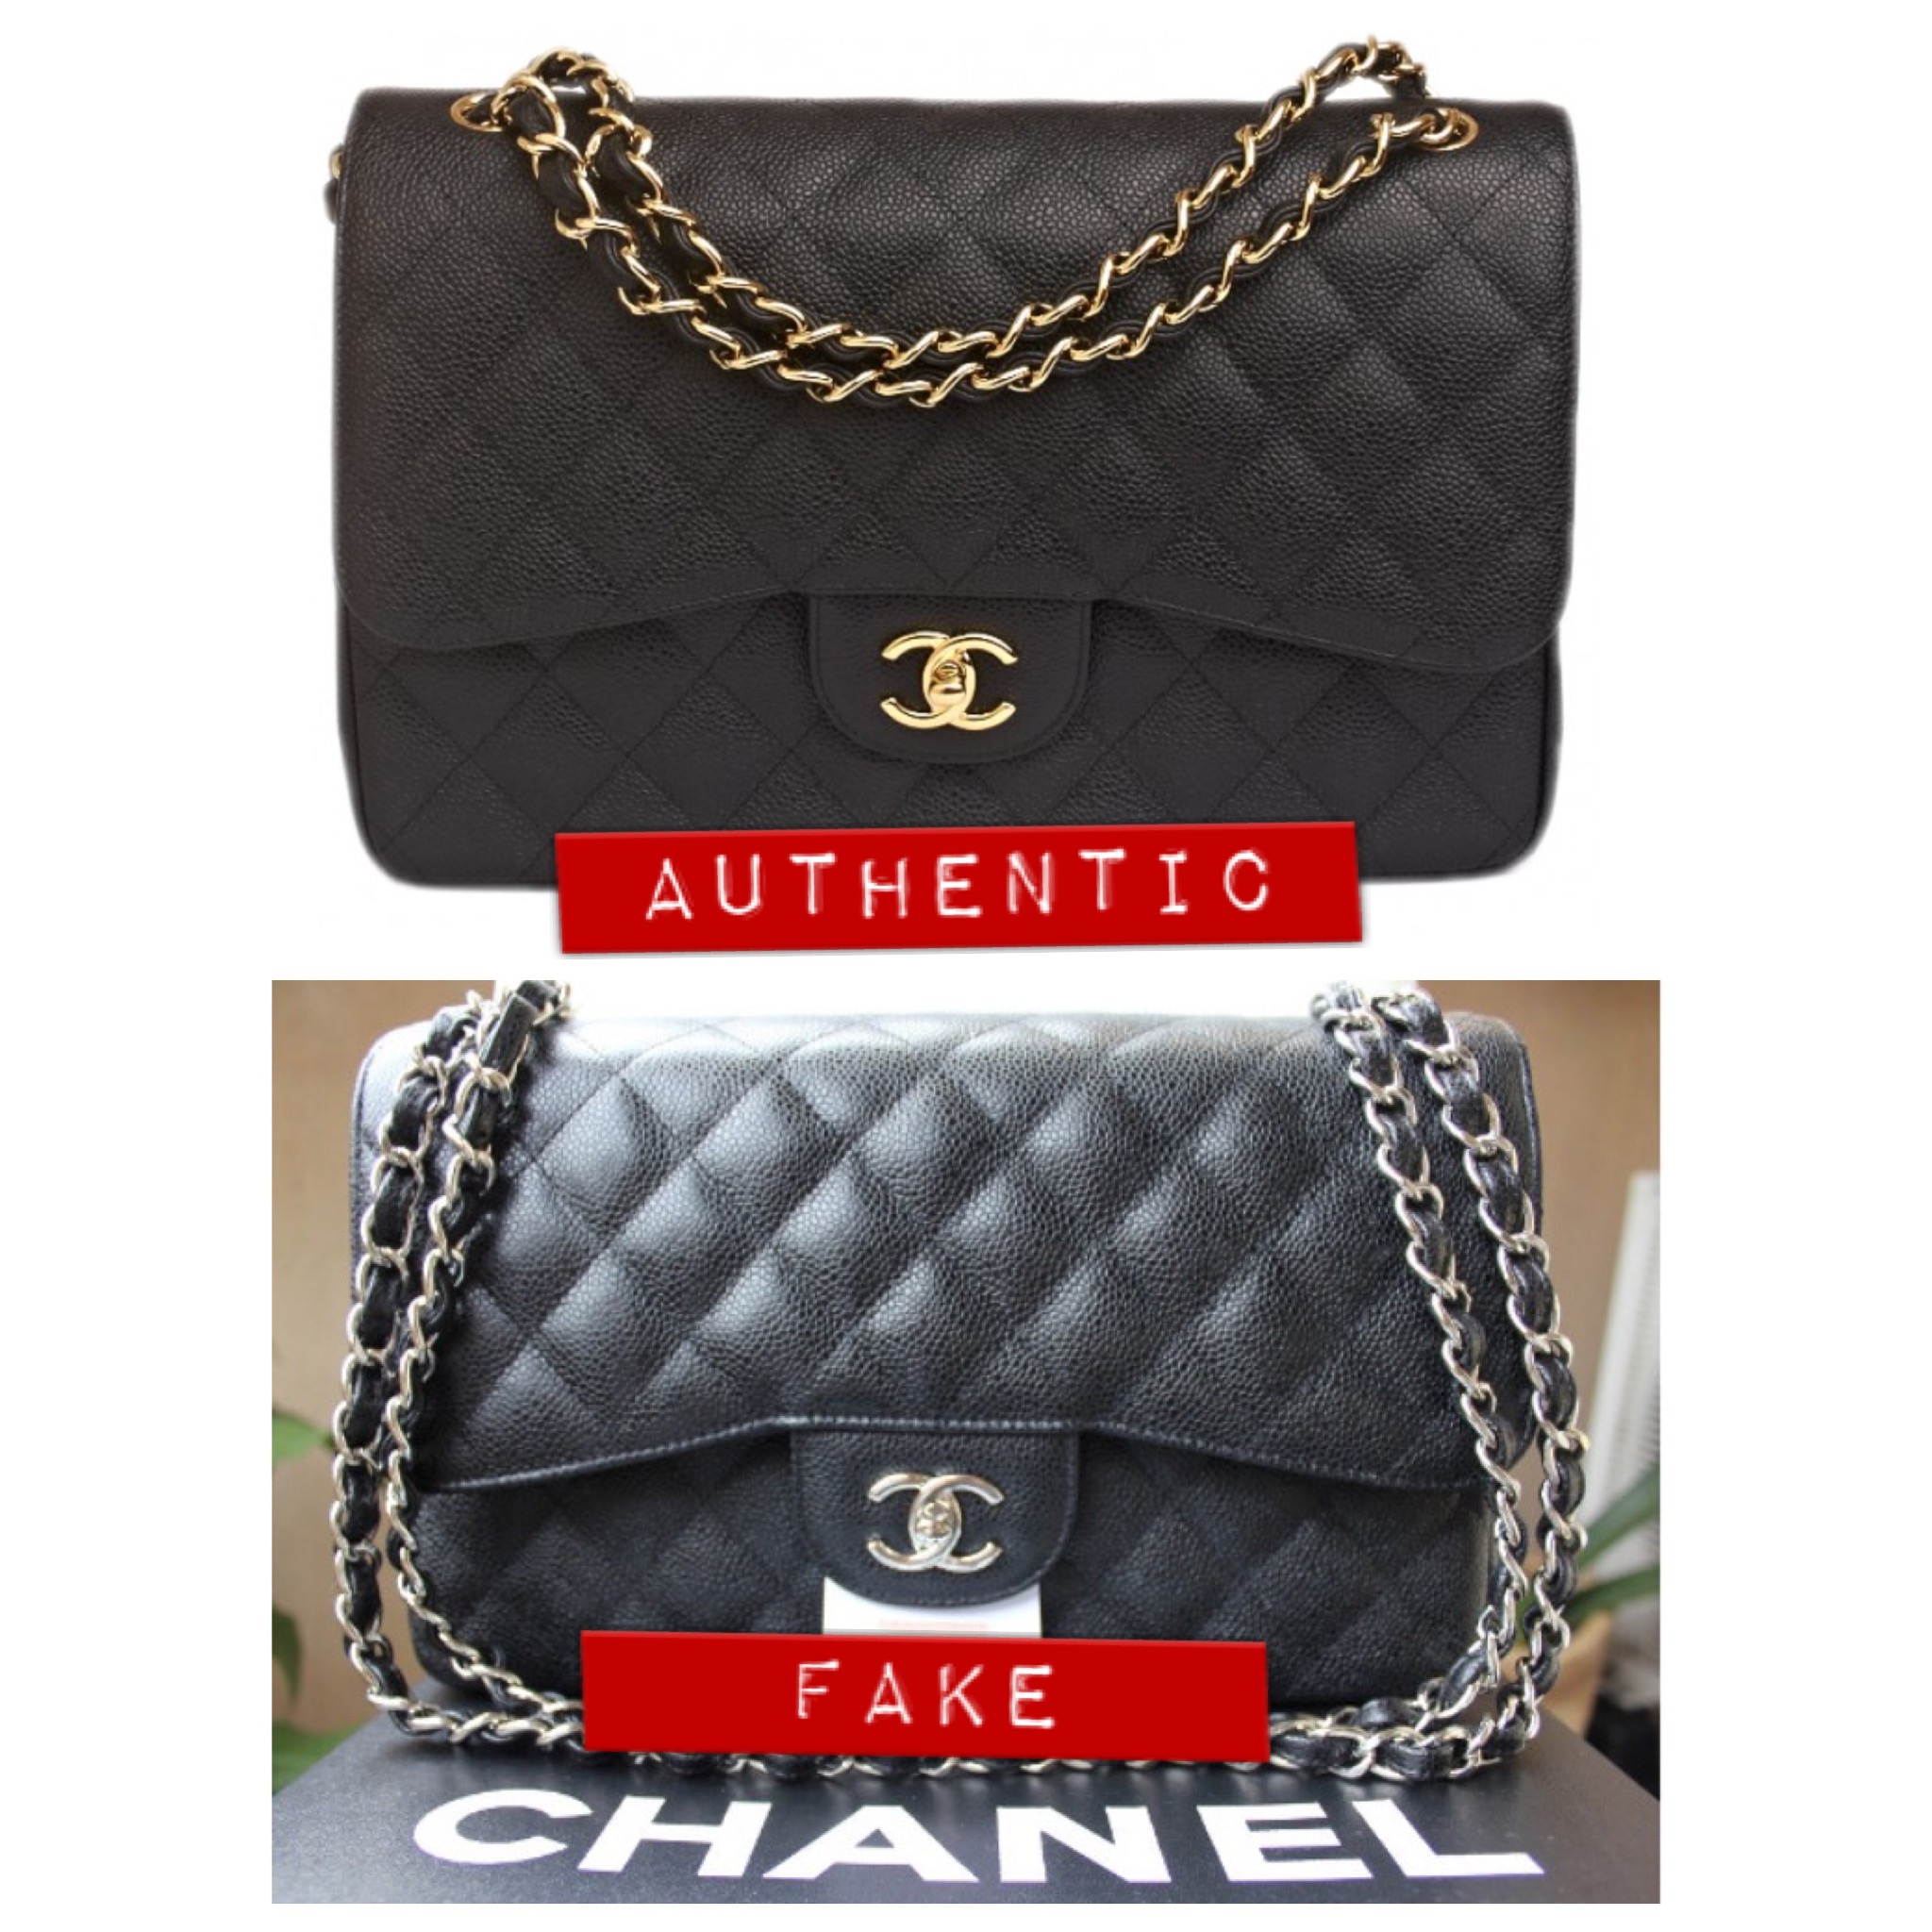 Some Tips to Find out Authenticity of Chanel Bags | Vanna Garcia